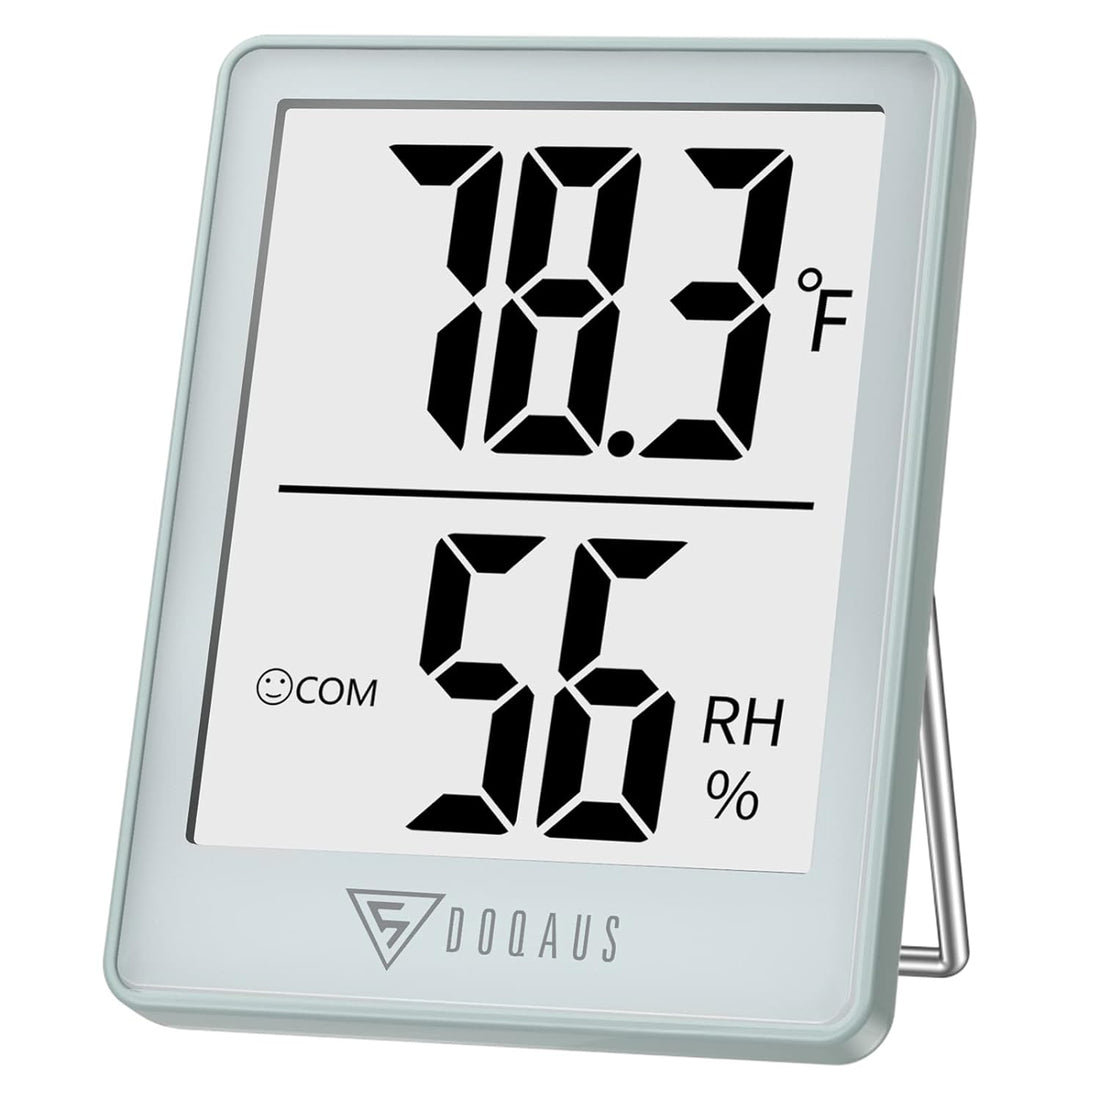 DOQAUS Digital Hygrometer Indoor Thermometer Humidity Gauge Room Thermometer with 5s Fast Refresh Accurate Temperature Humidity Monitor, Light Blue